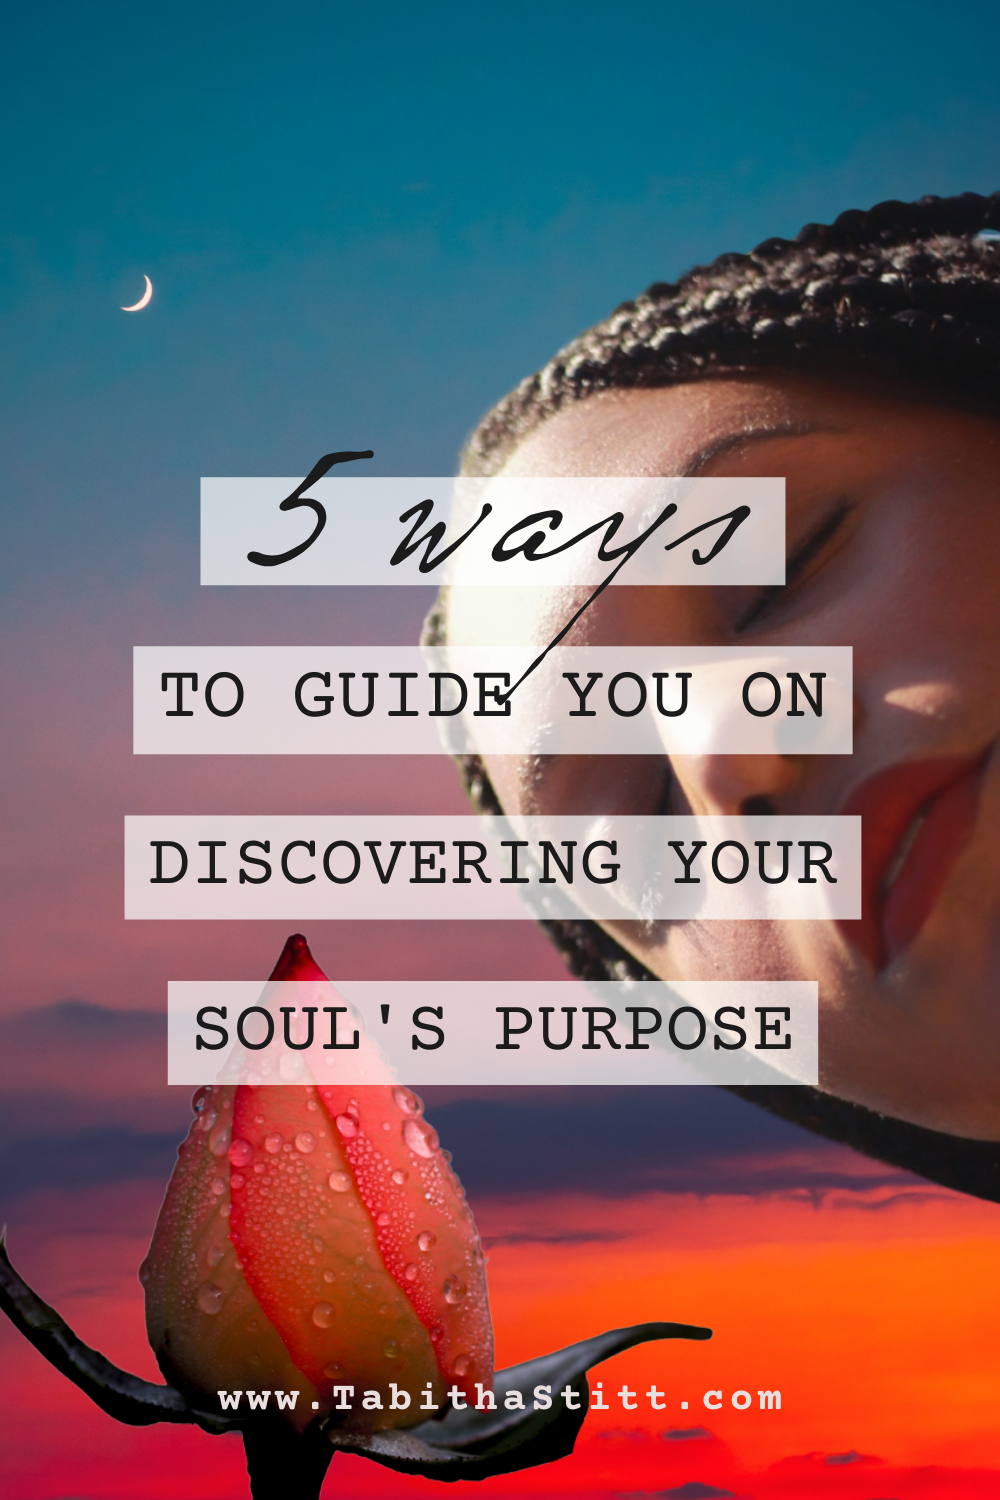 5 ways to guide you on discovering your soul's purpose with Tabitha Stitt, The Self-Help Psychic, spiritual teacher and healer displaying a rose for transformation and inner growth and love for your soul's path and journey